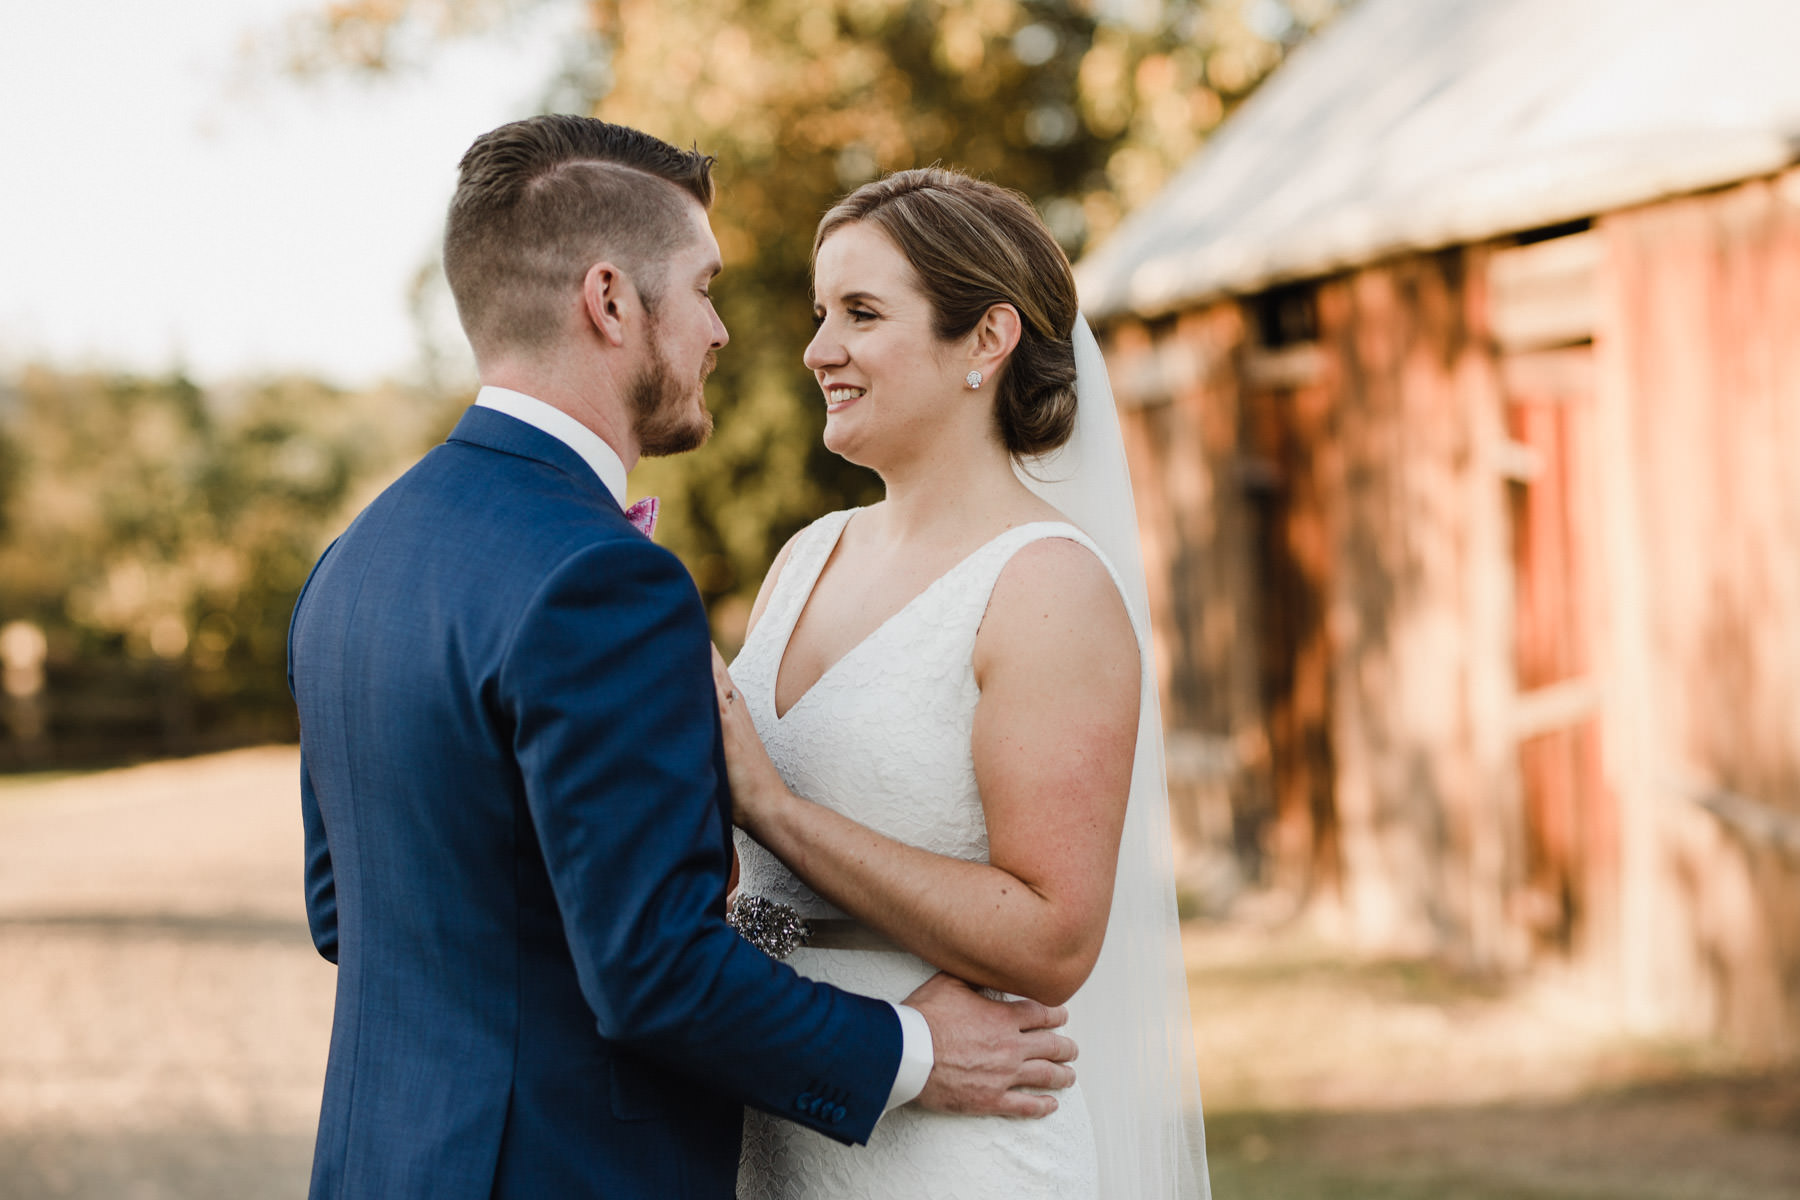 084Hunter Valley Wedding Photographers Bryce Noone Photography at Tocal Homestead Wedding Venue.jpg